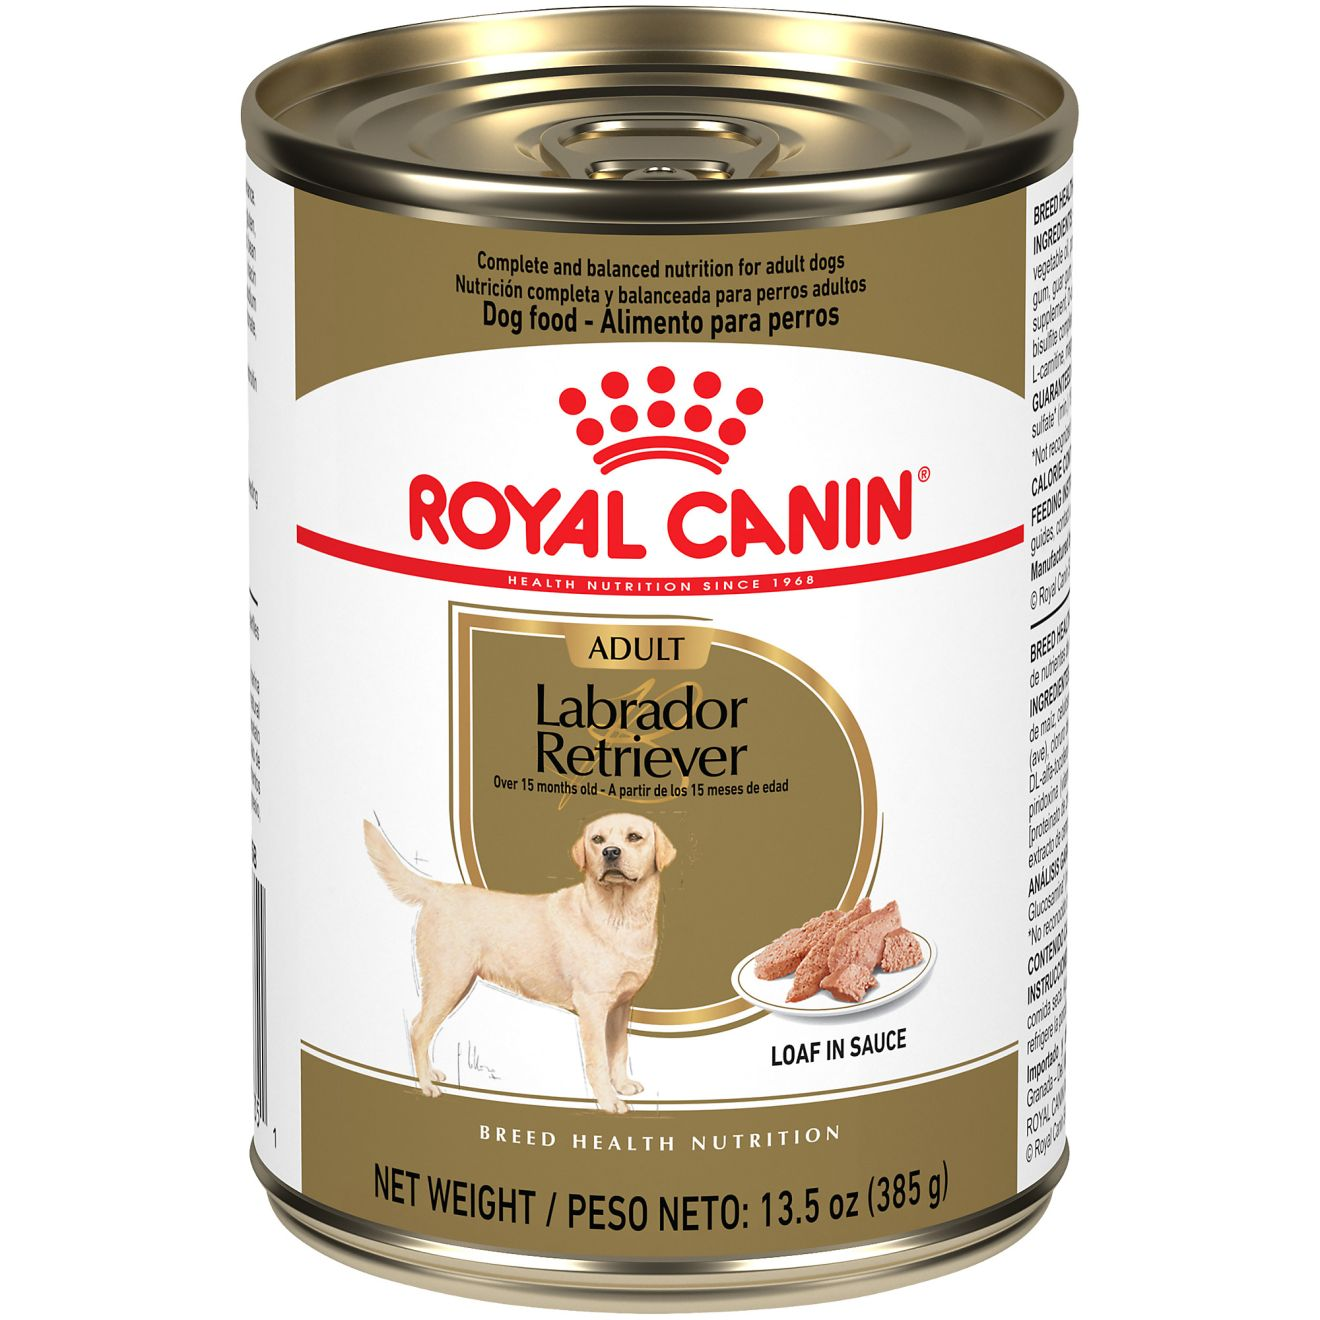 Labrador Retriever Adult Loaf in Sauce Canned Dog Food